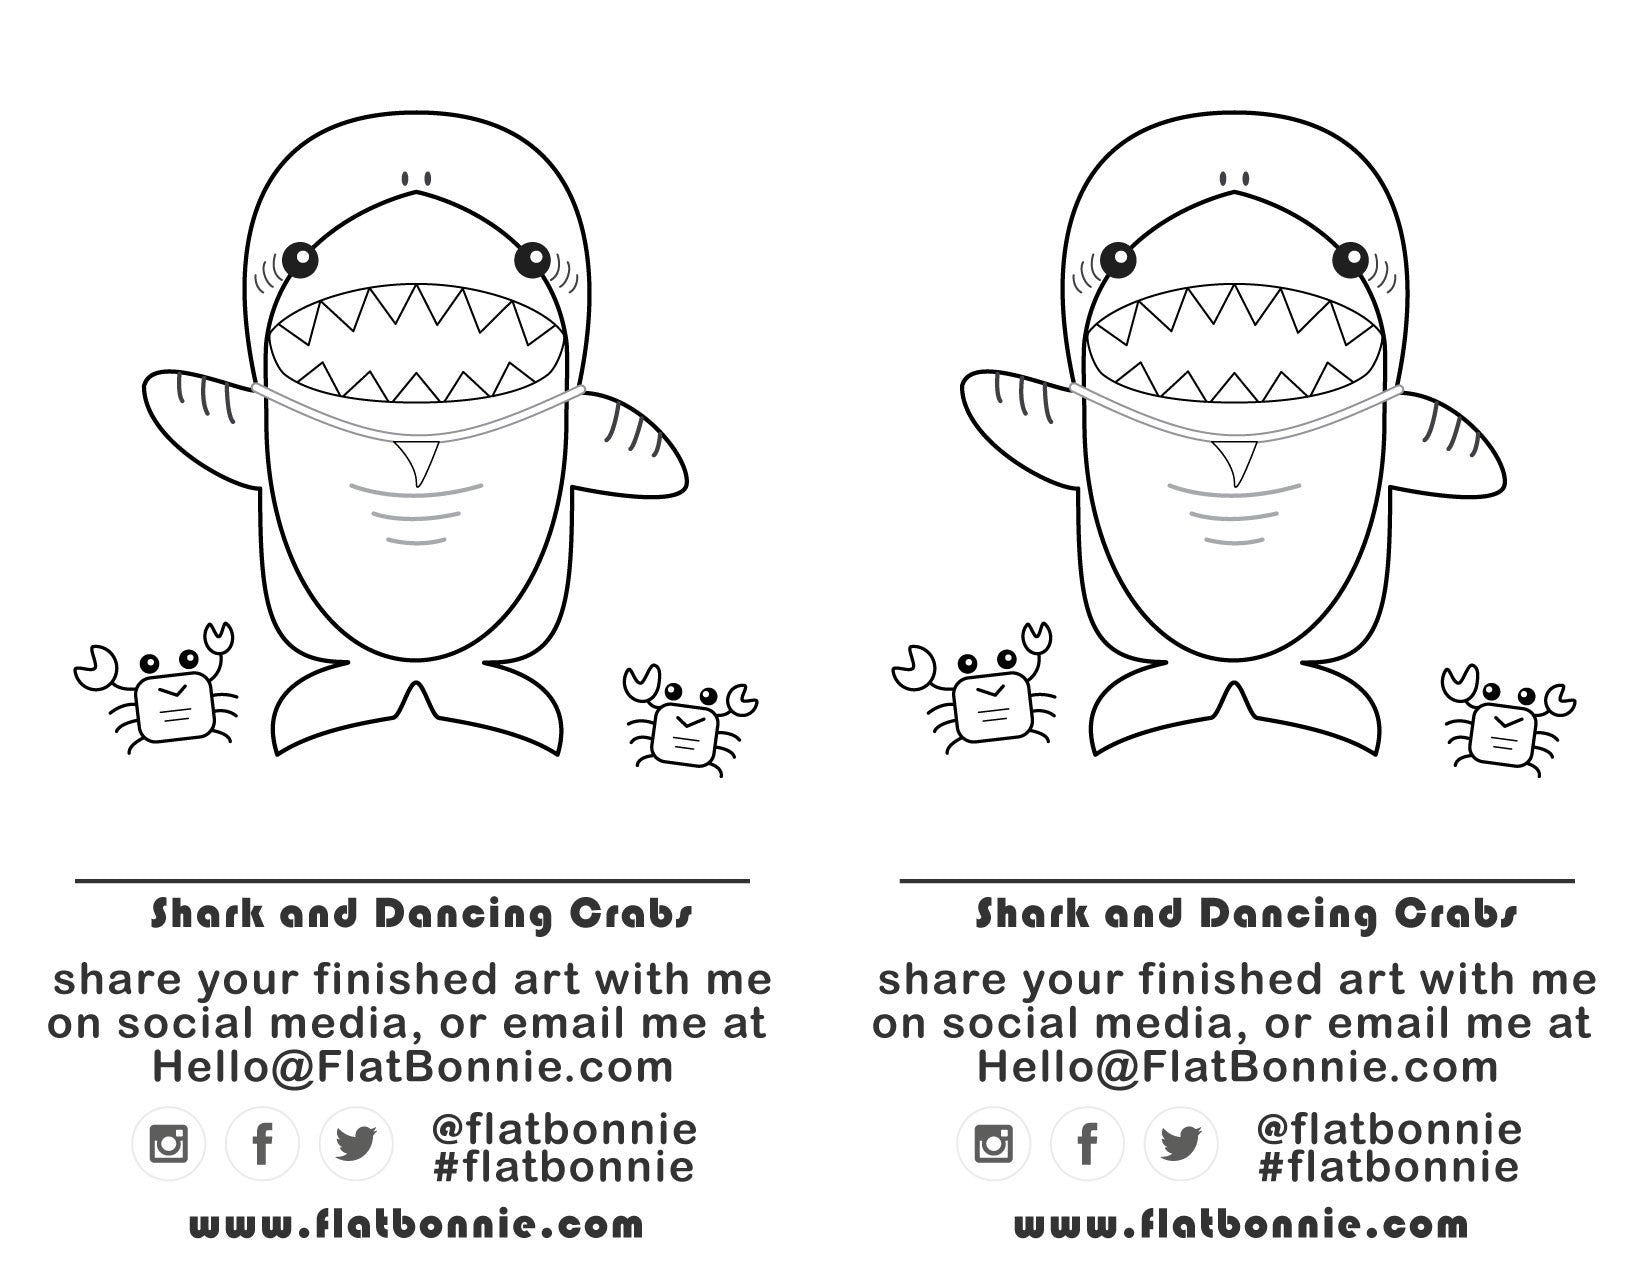 Flat-Bonnie-Free-Coloring-Page-Shark-Dancing-Crabs-x2